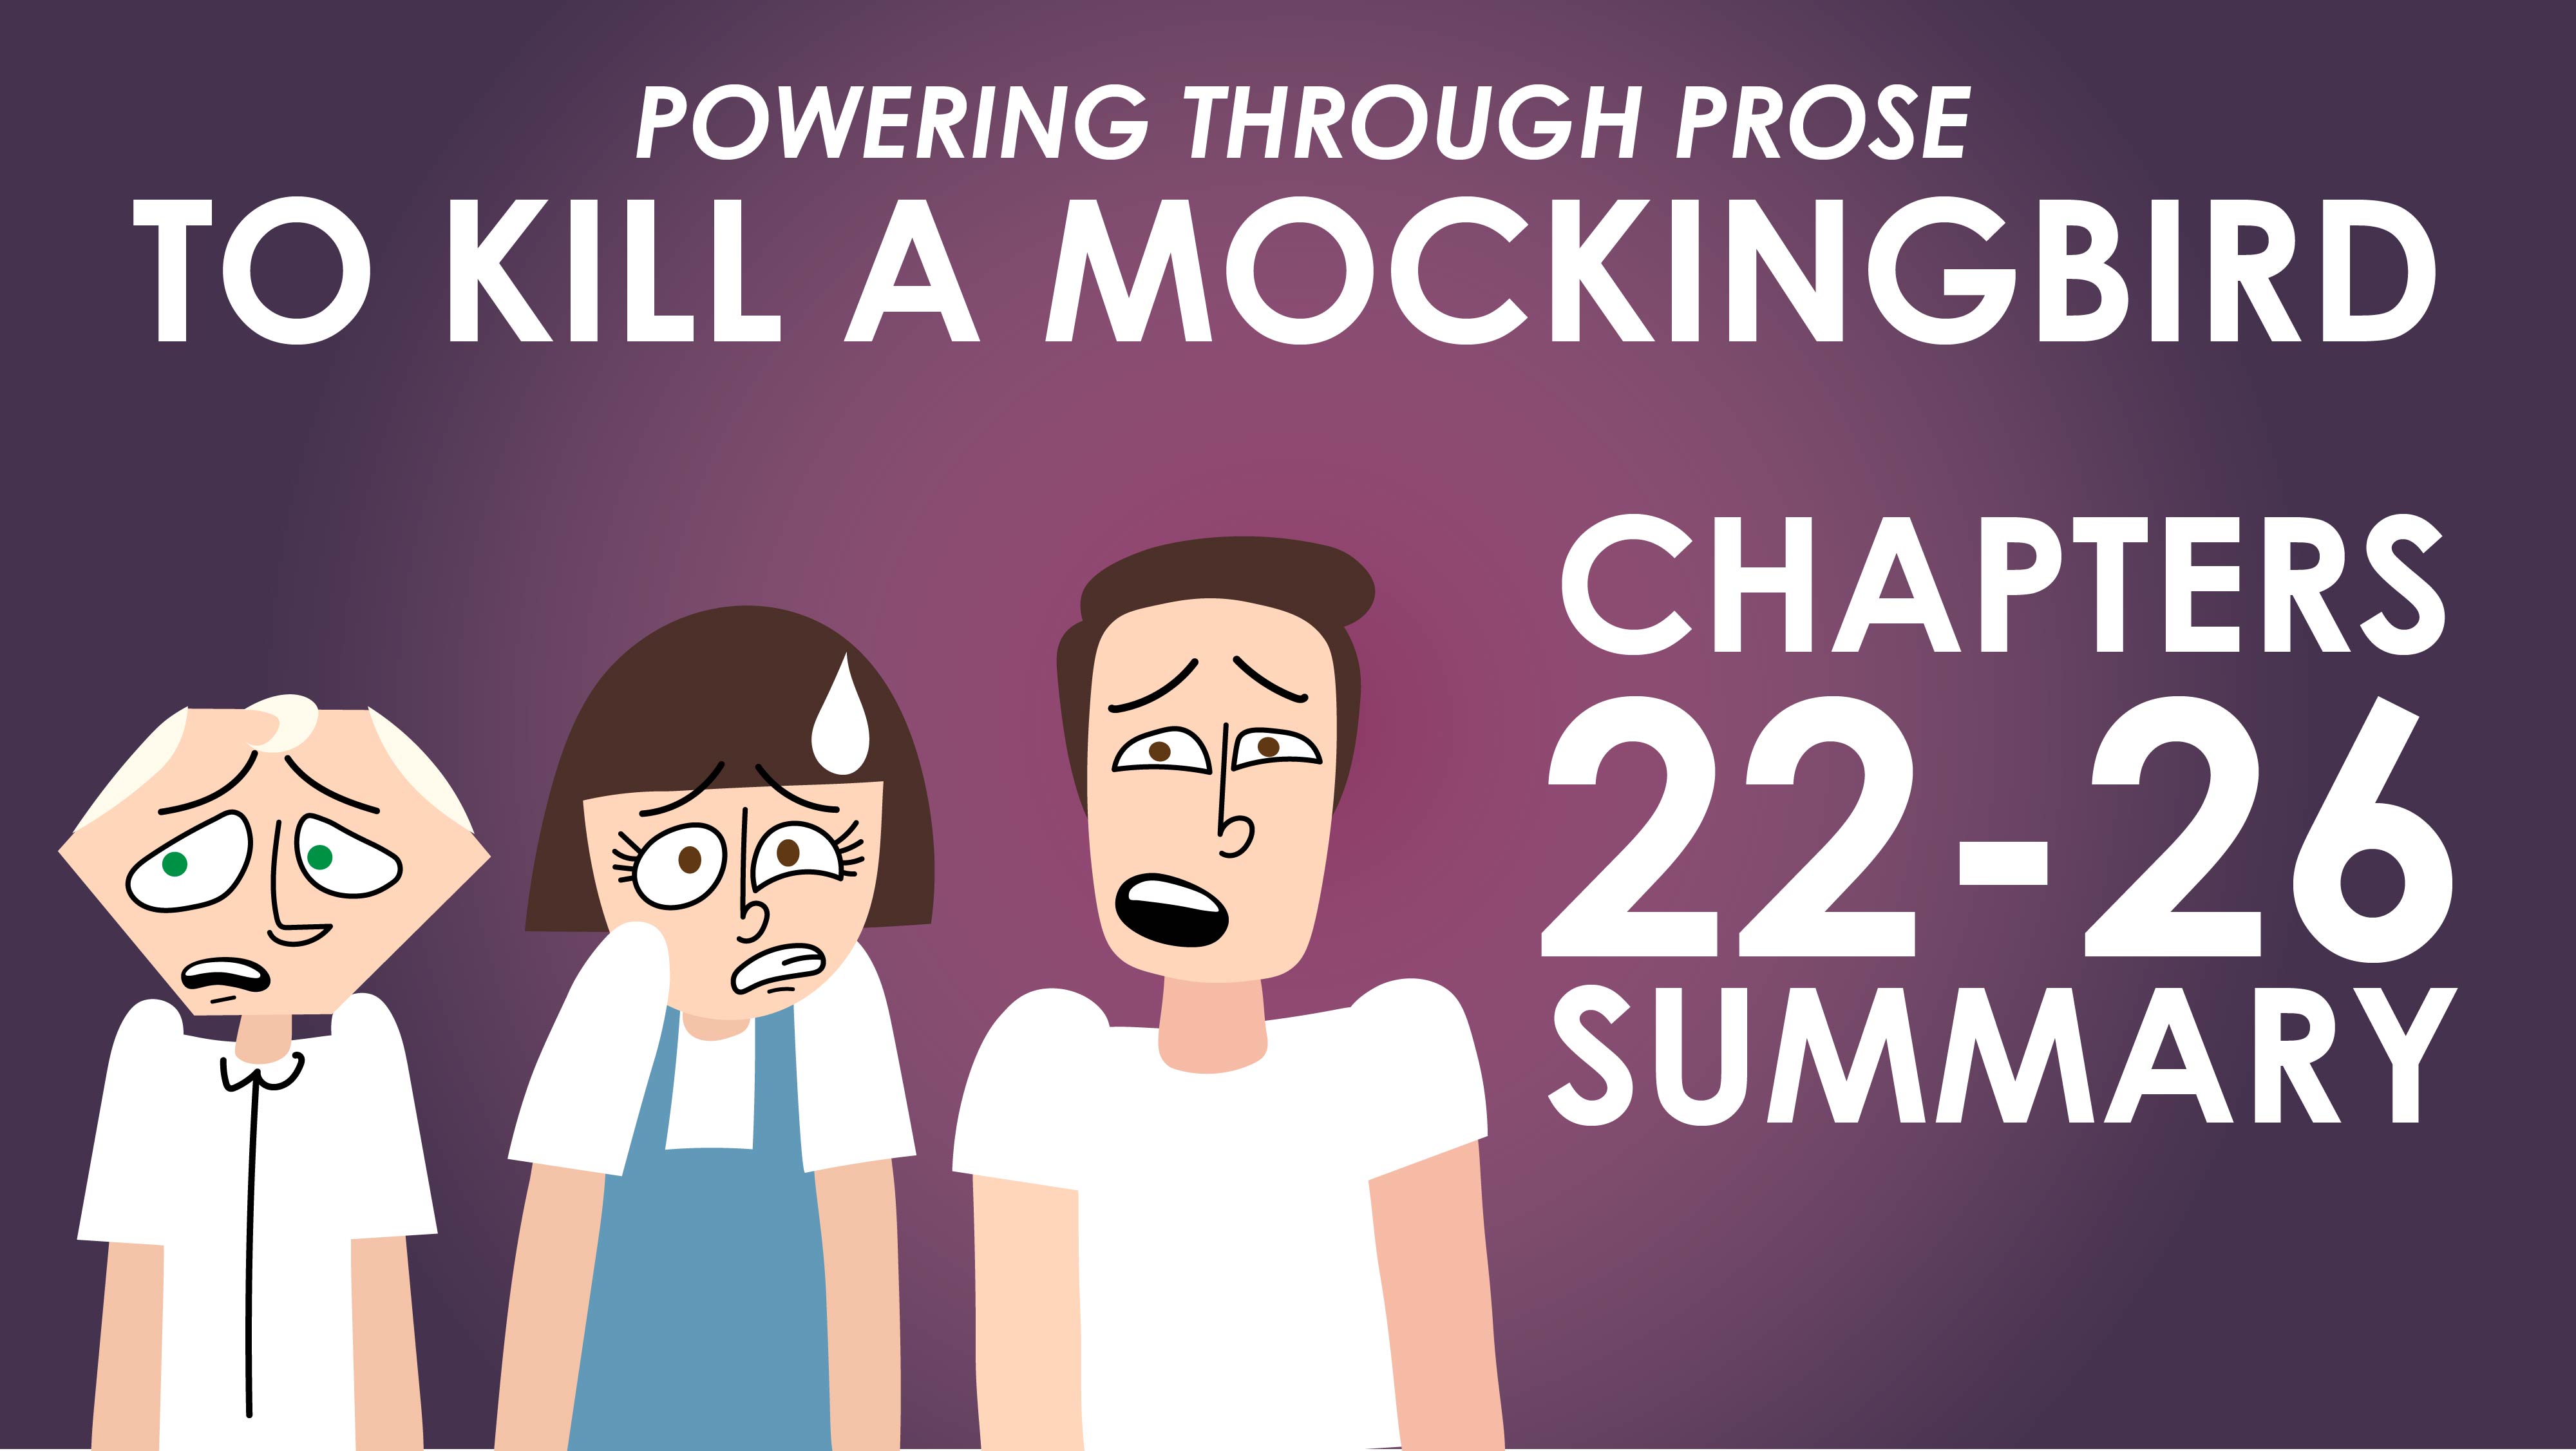 To Kill a Mockingbird - Harper Lee - Chapters 22-26 Summary - Powering Through Prose Series